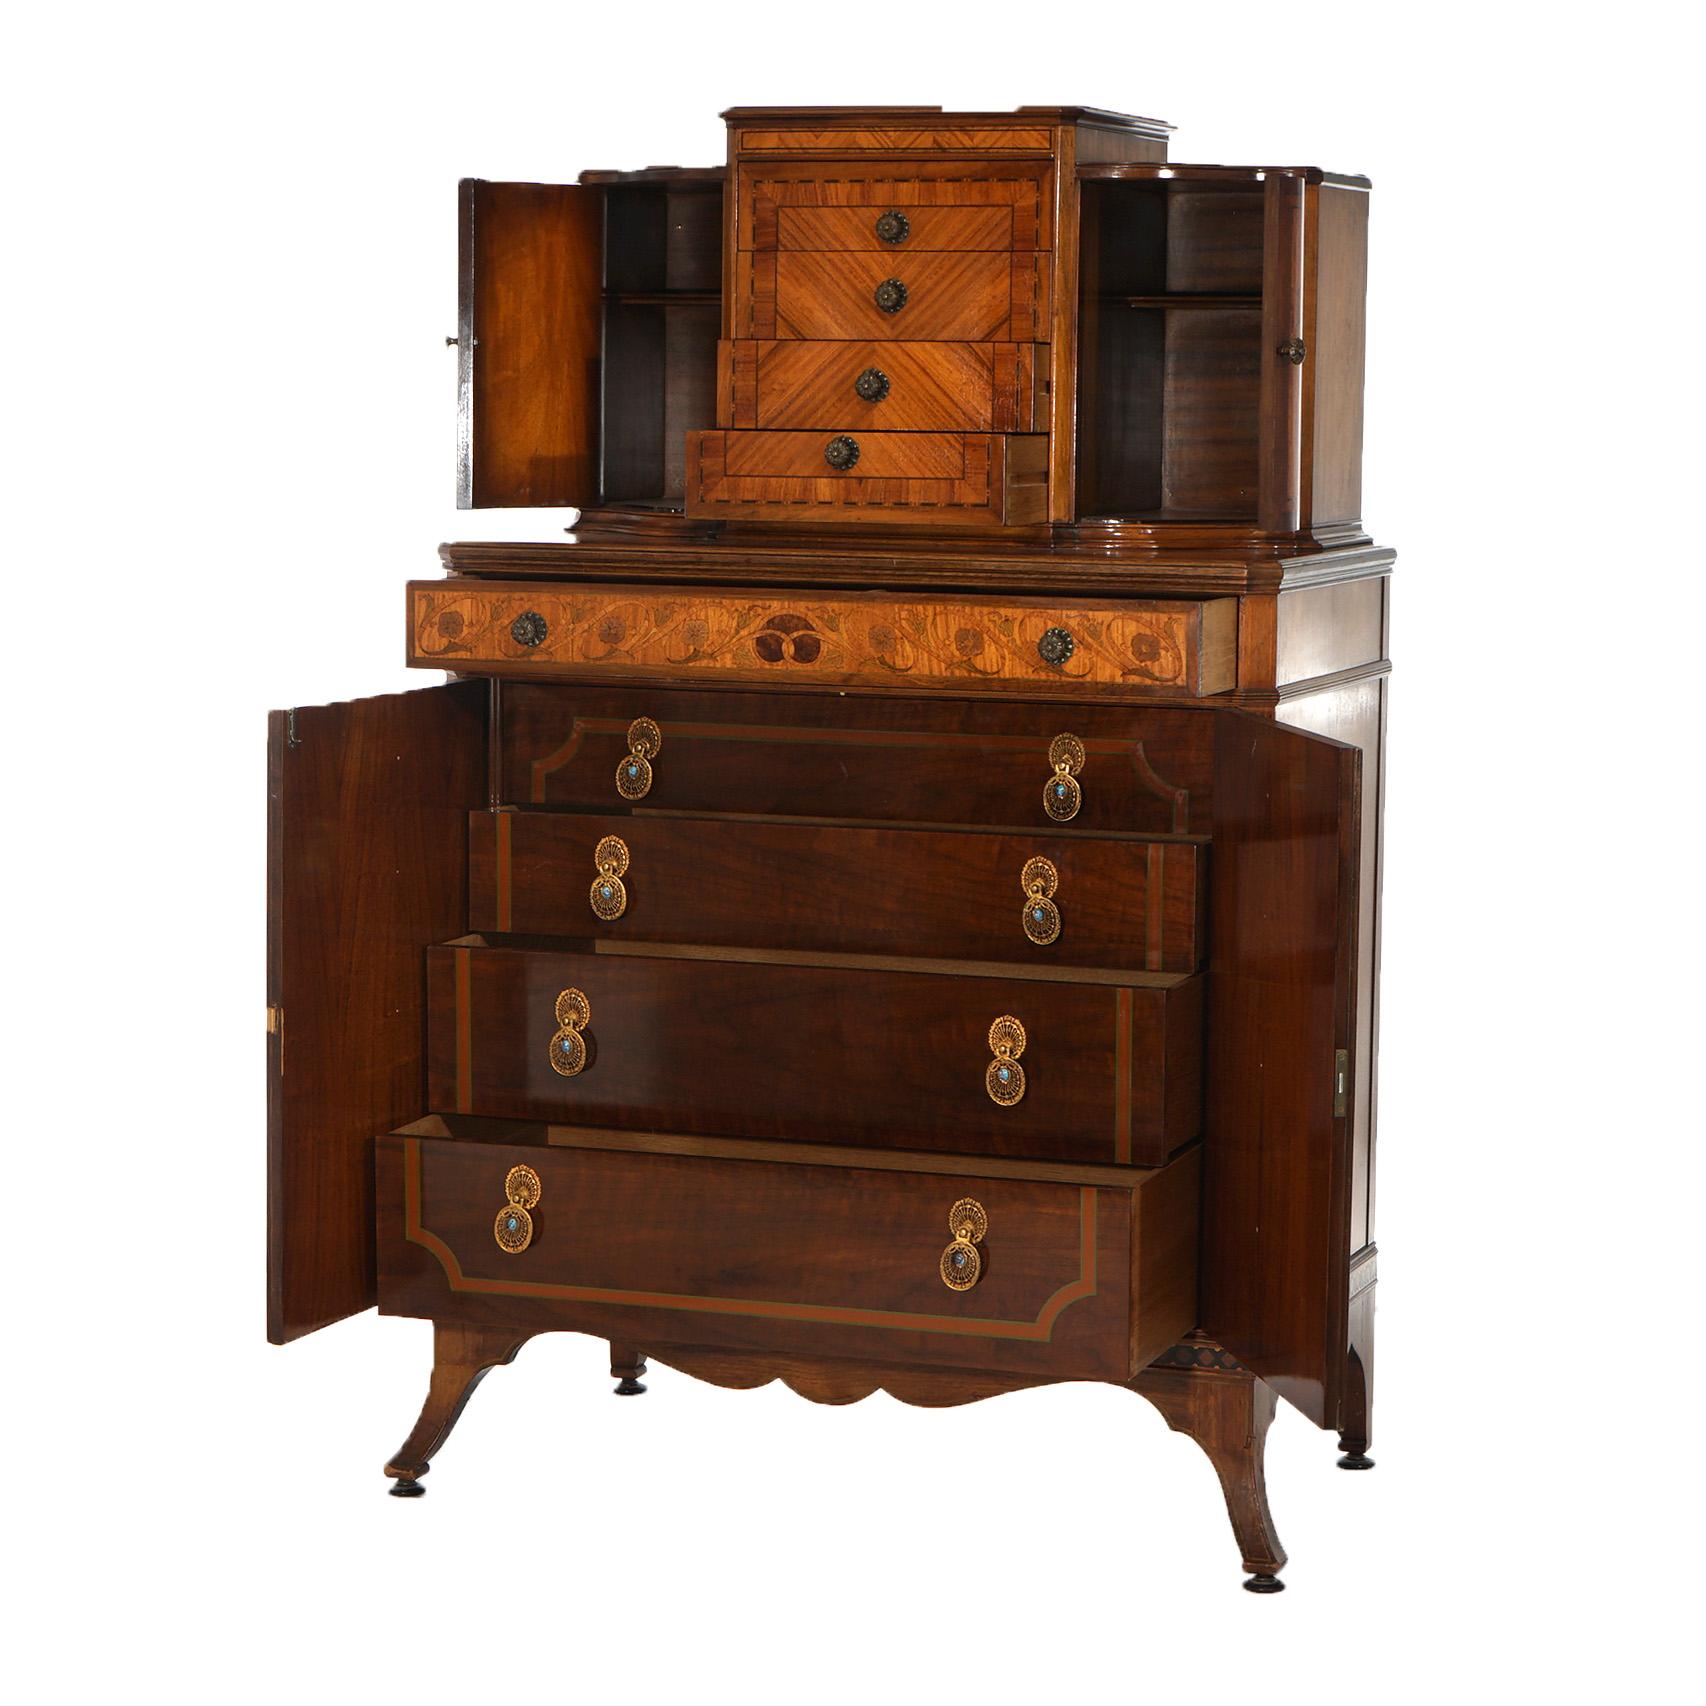 ***Ask About Reduced In-House Shipping Rates - Reliable Service & Fully Insured***
An antique chifferobe dresser by Johnson Furniture Co. offers satinwood and mahogany construction with floral marquetry and upper drawer tower having flanking blind